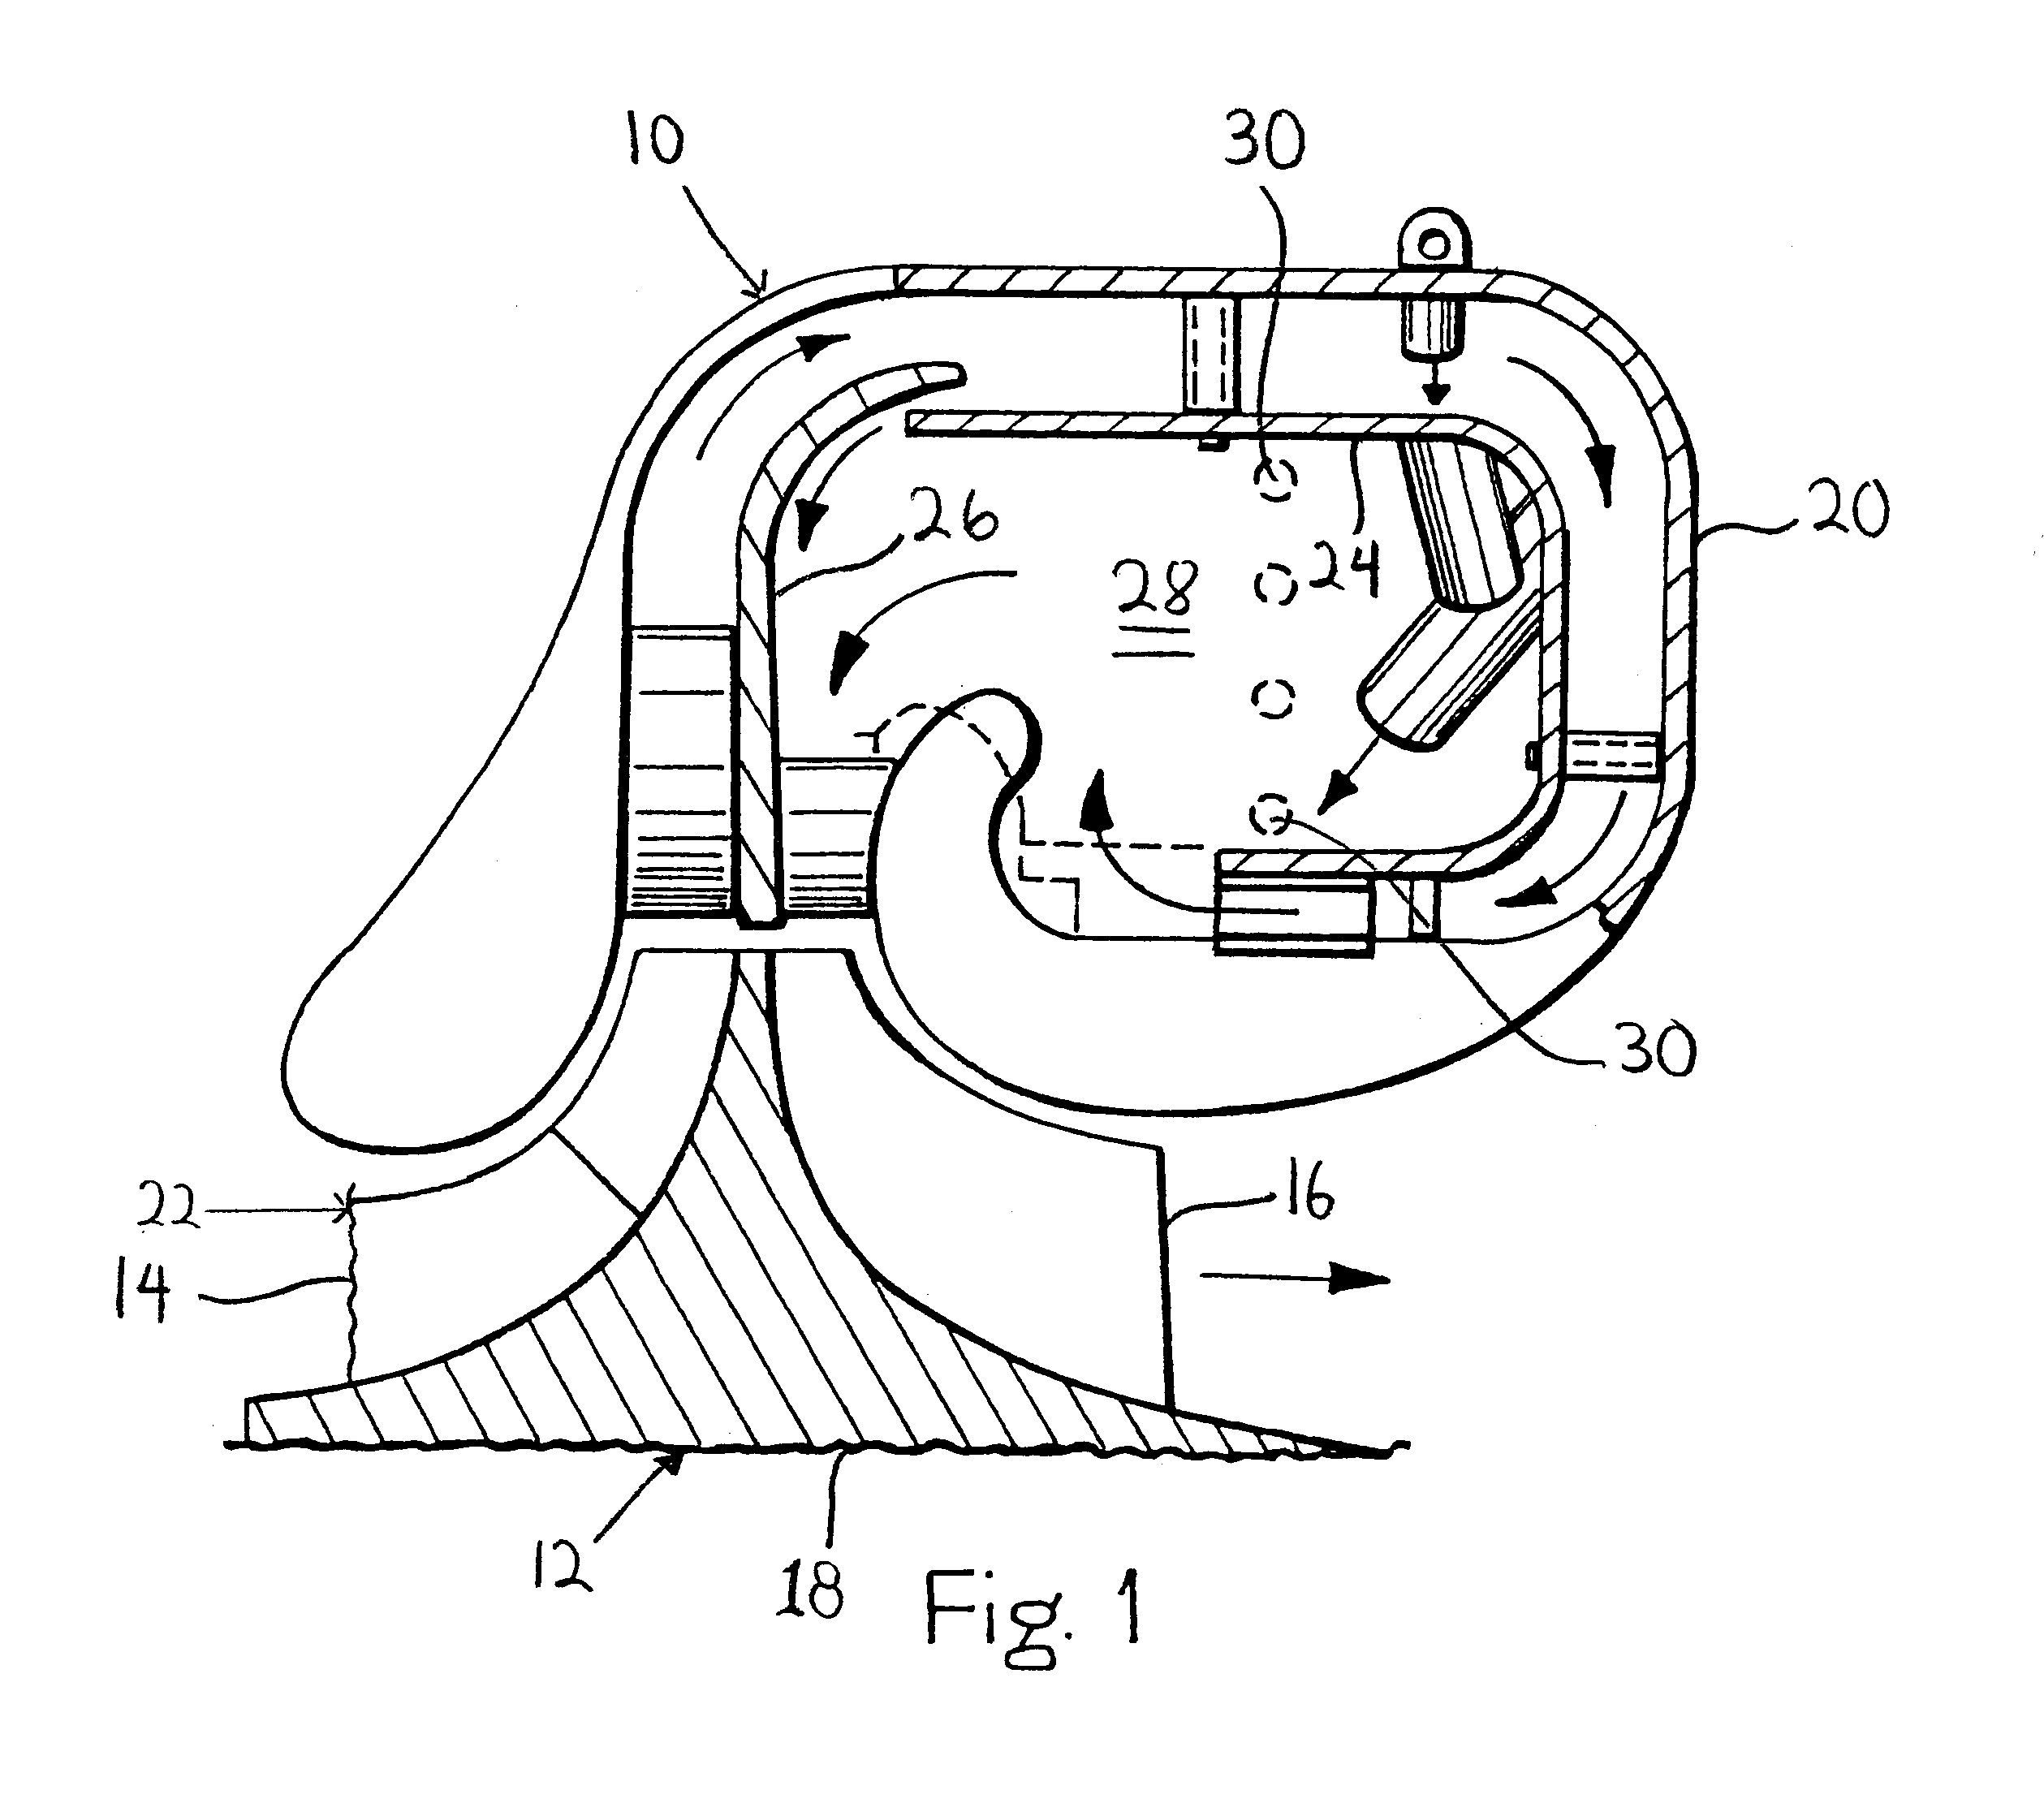 Method for ignition and start up of a turbogenerator